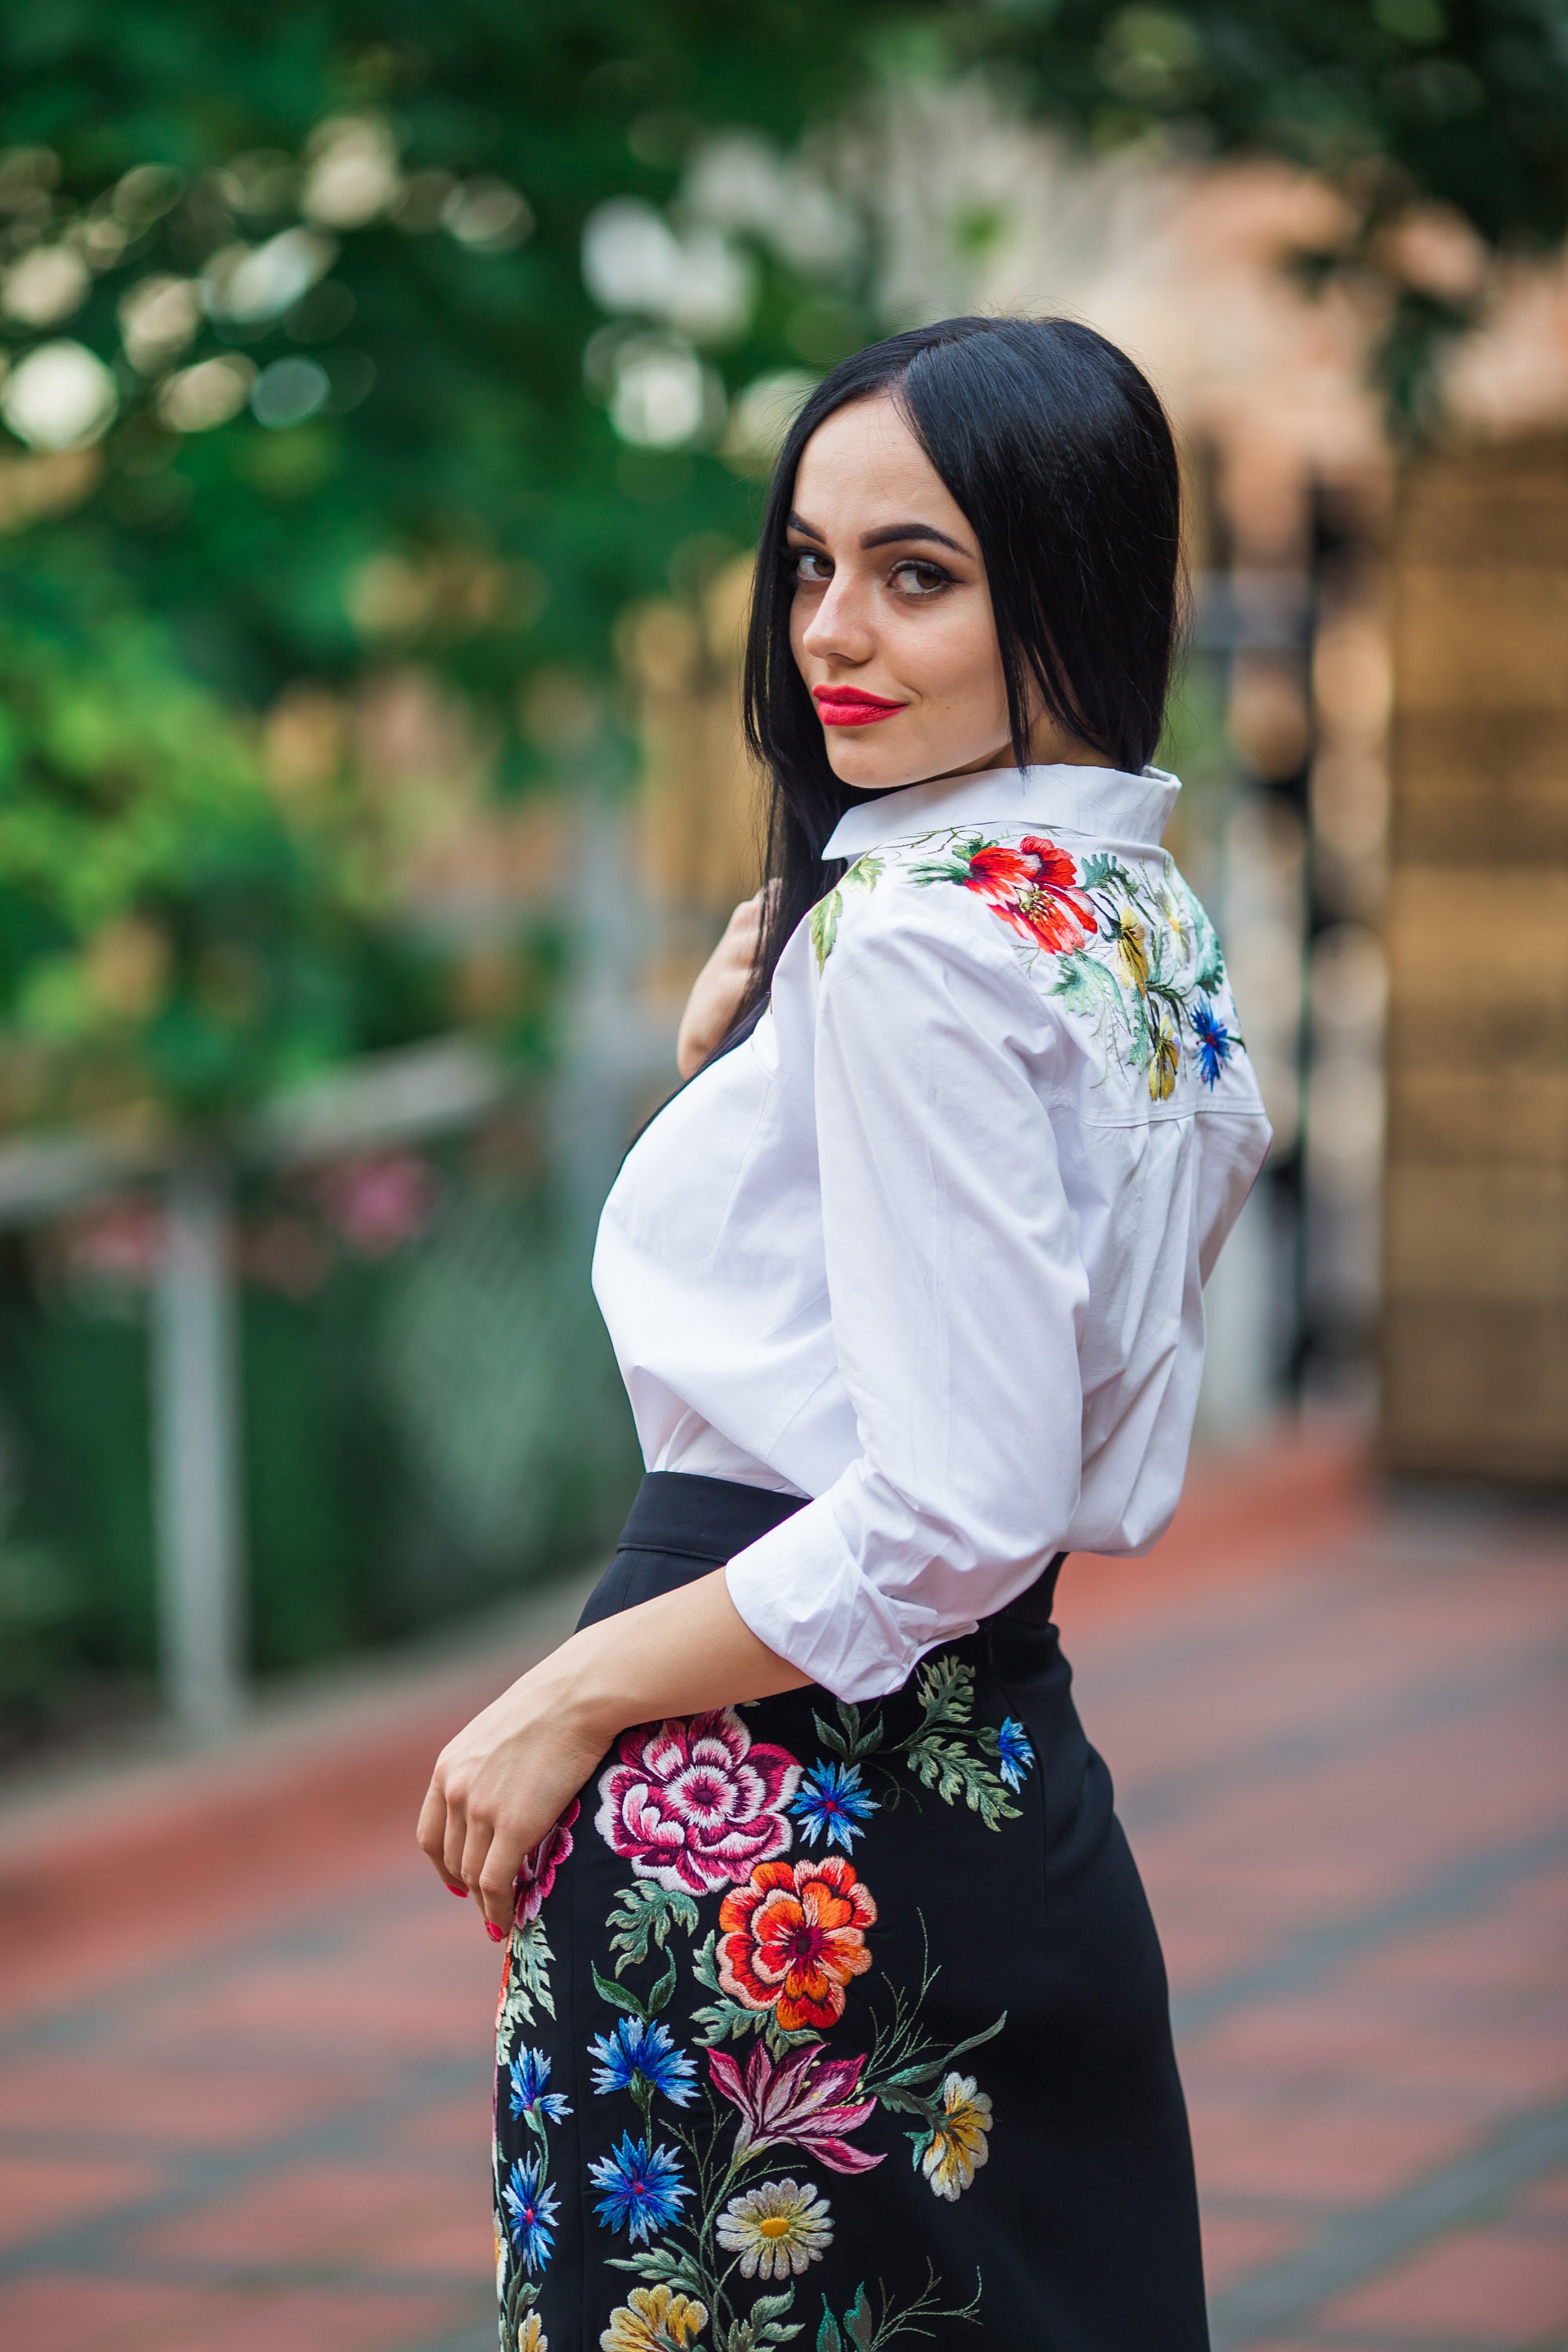 Embroidered Blouse, Floral Blouse, Vyshyvanka, Handmade Blouse, Peasant ...